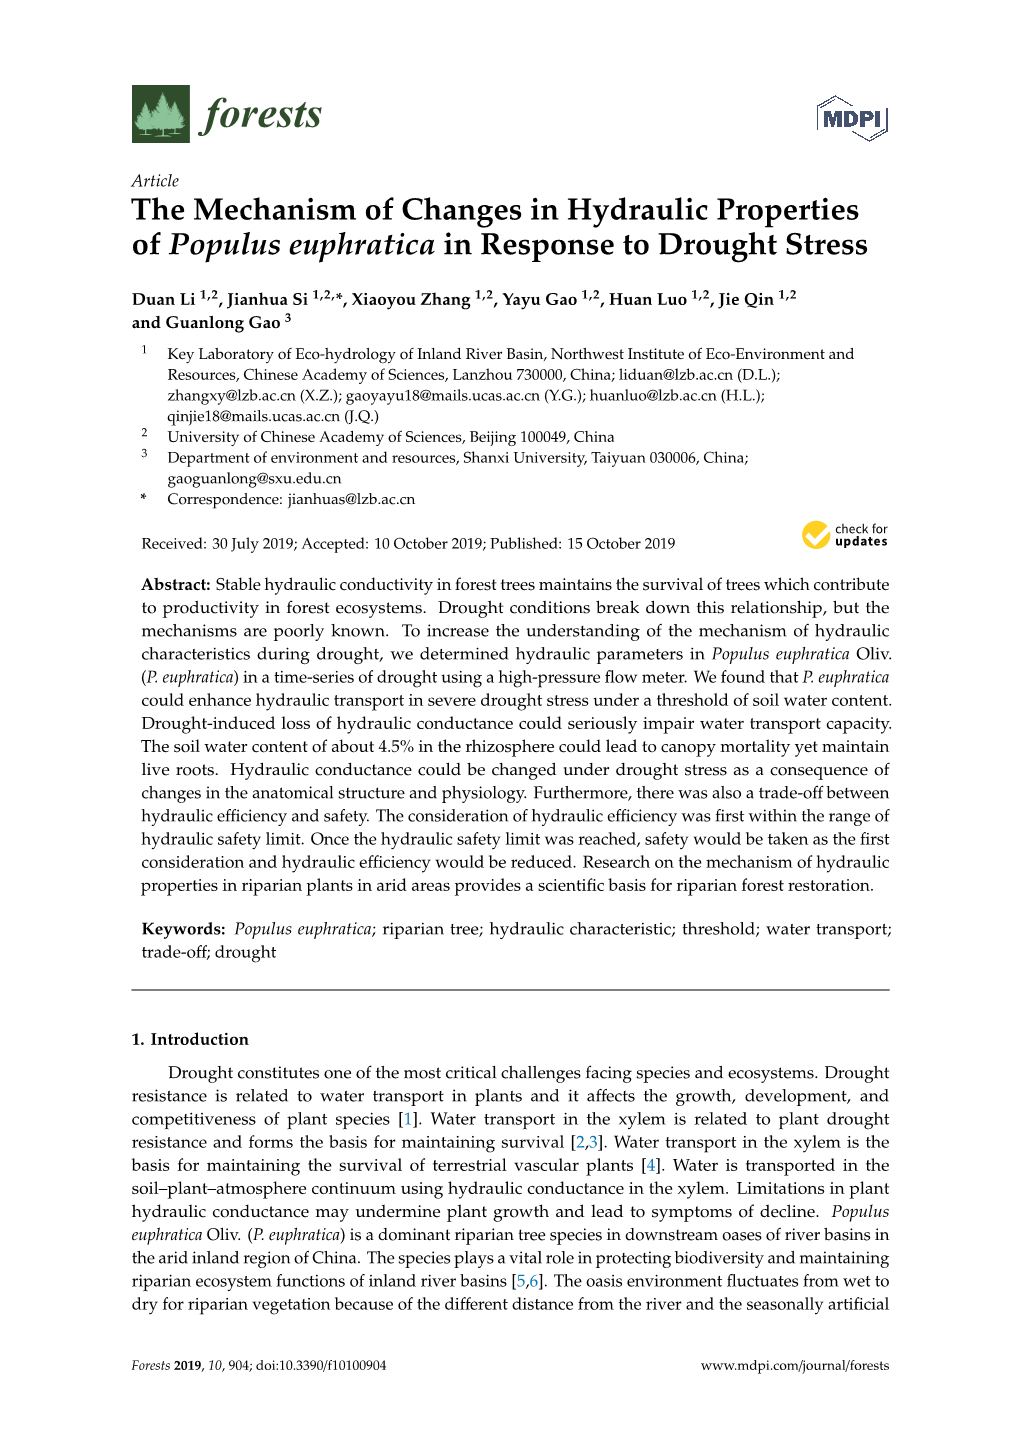 The Mechanism of Changes in Hydraulic Properties of Populus Euphratica in Response to Drought Stress